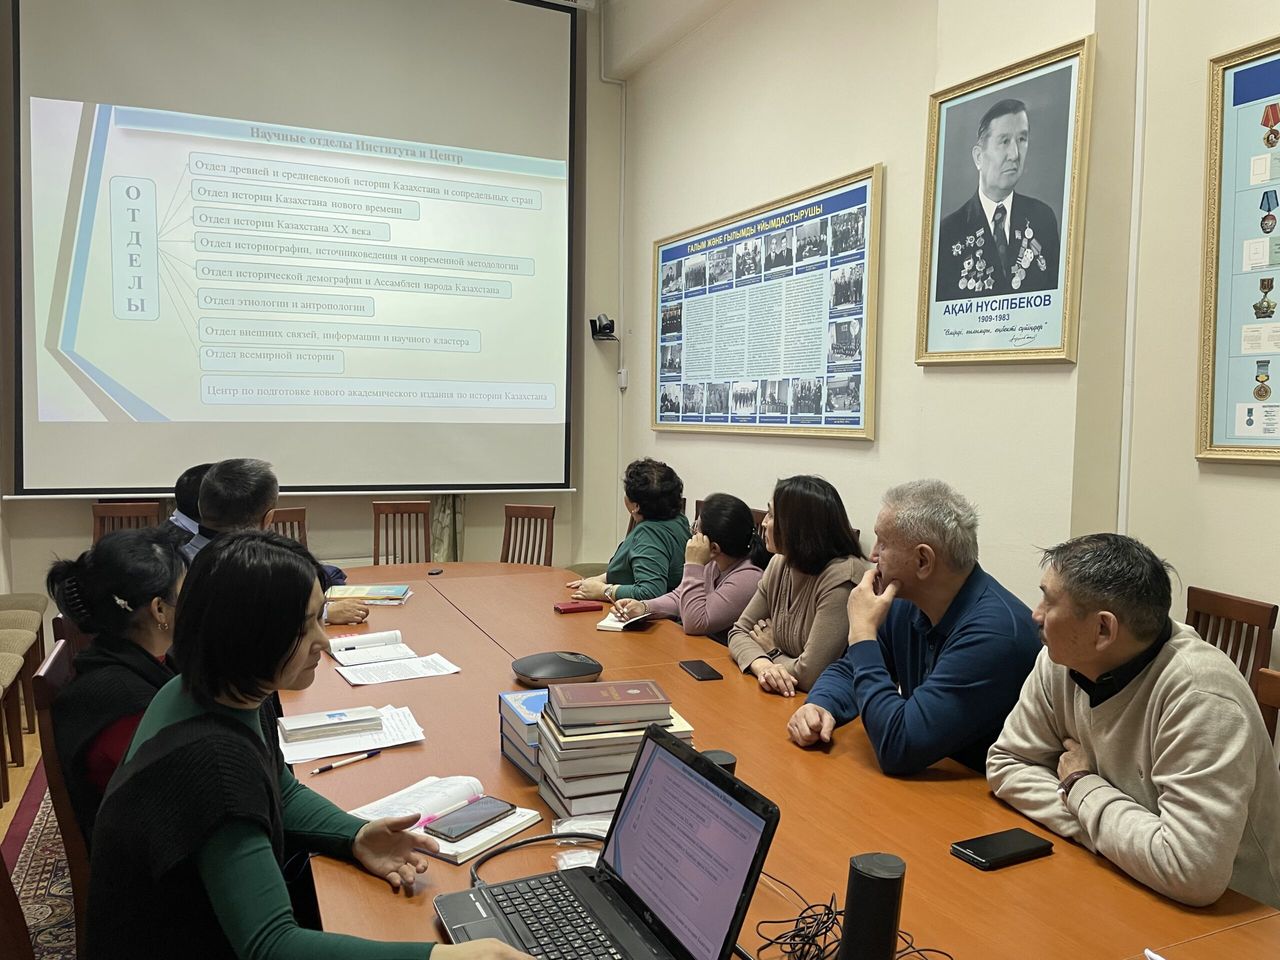 A MEMORANDUM OF MUTUAL COOPERATION HAS BEEN CONCLUDED BETWEEN THE CH.CH. VALIKHANOV INSTITUTE OF HISTORY AND ETHNOLOGY AND THE AKTAN BABIULY CENTRAL LIBRARY OF MONGOLIA